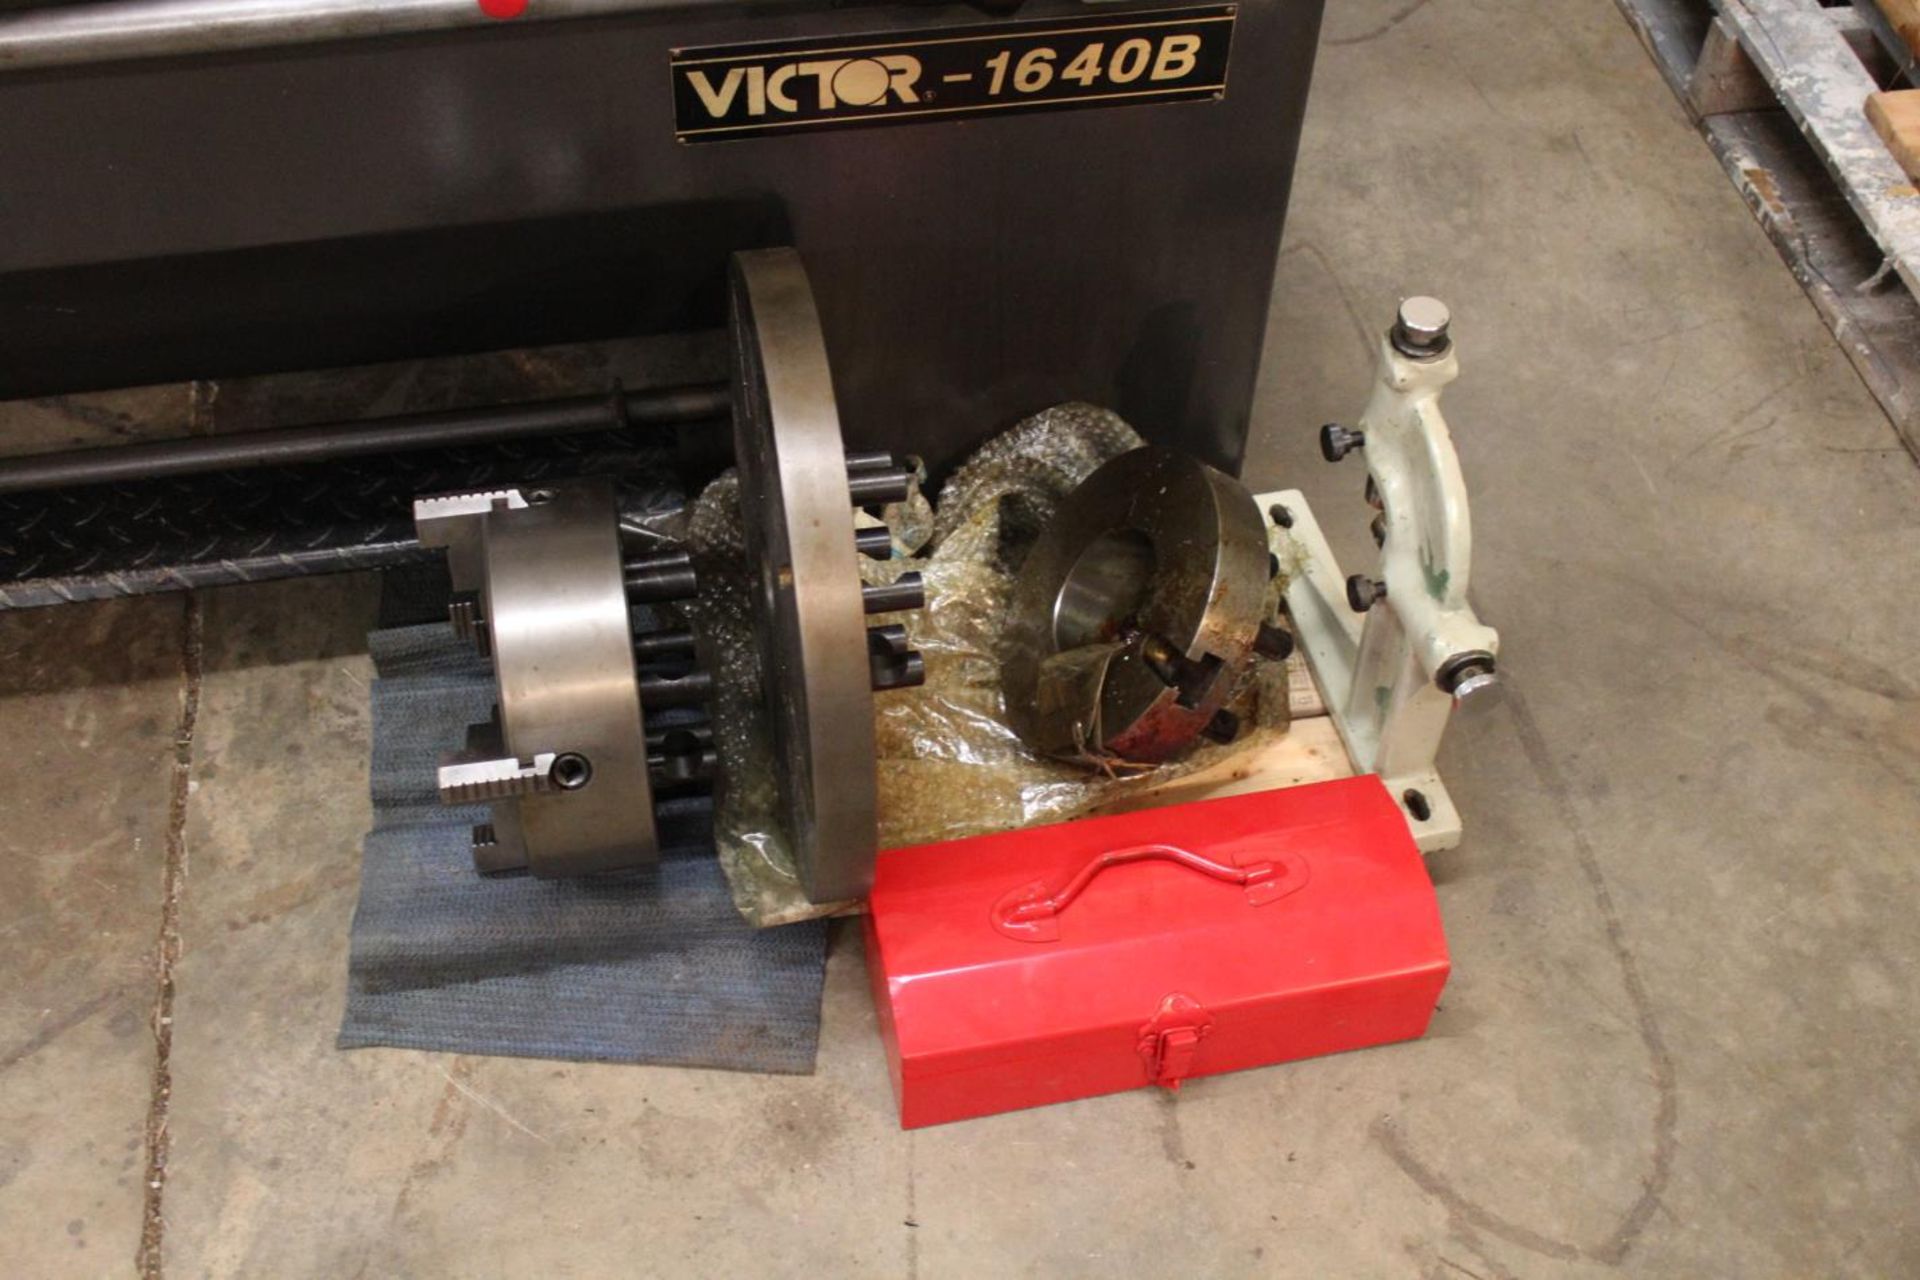 Victor 1640B Gap Bed Engine Lathe (video)  D1-6" Camlock Spindle, 2.06" HTS, in/mm Threading - Image 7 of 18